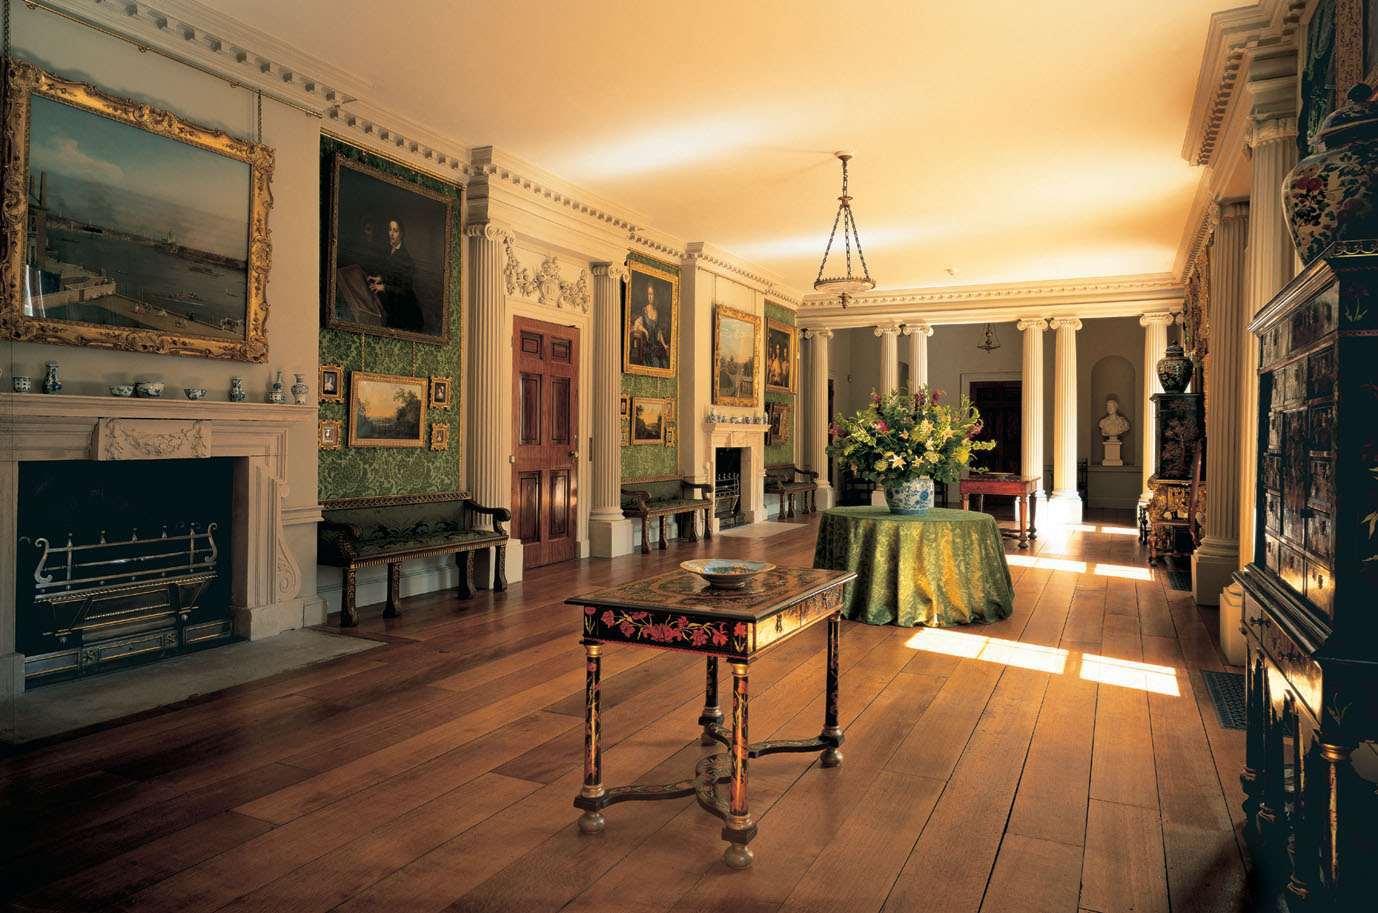 The Long Hall at Goodwood House with the two Canaletto paintings in their original positions